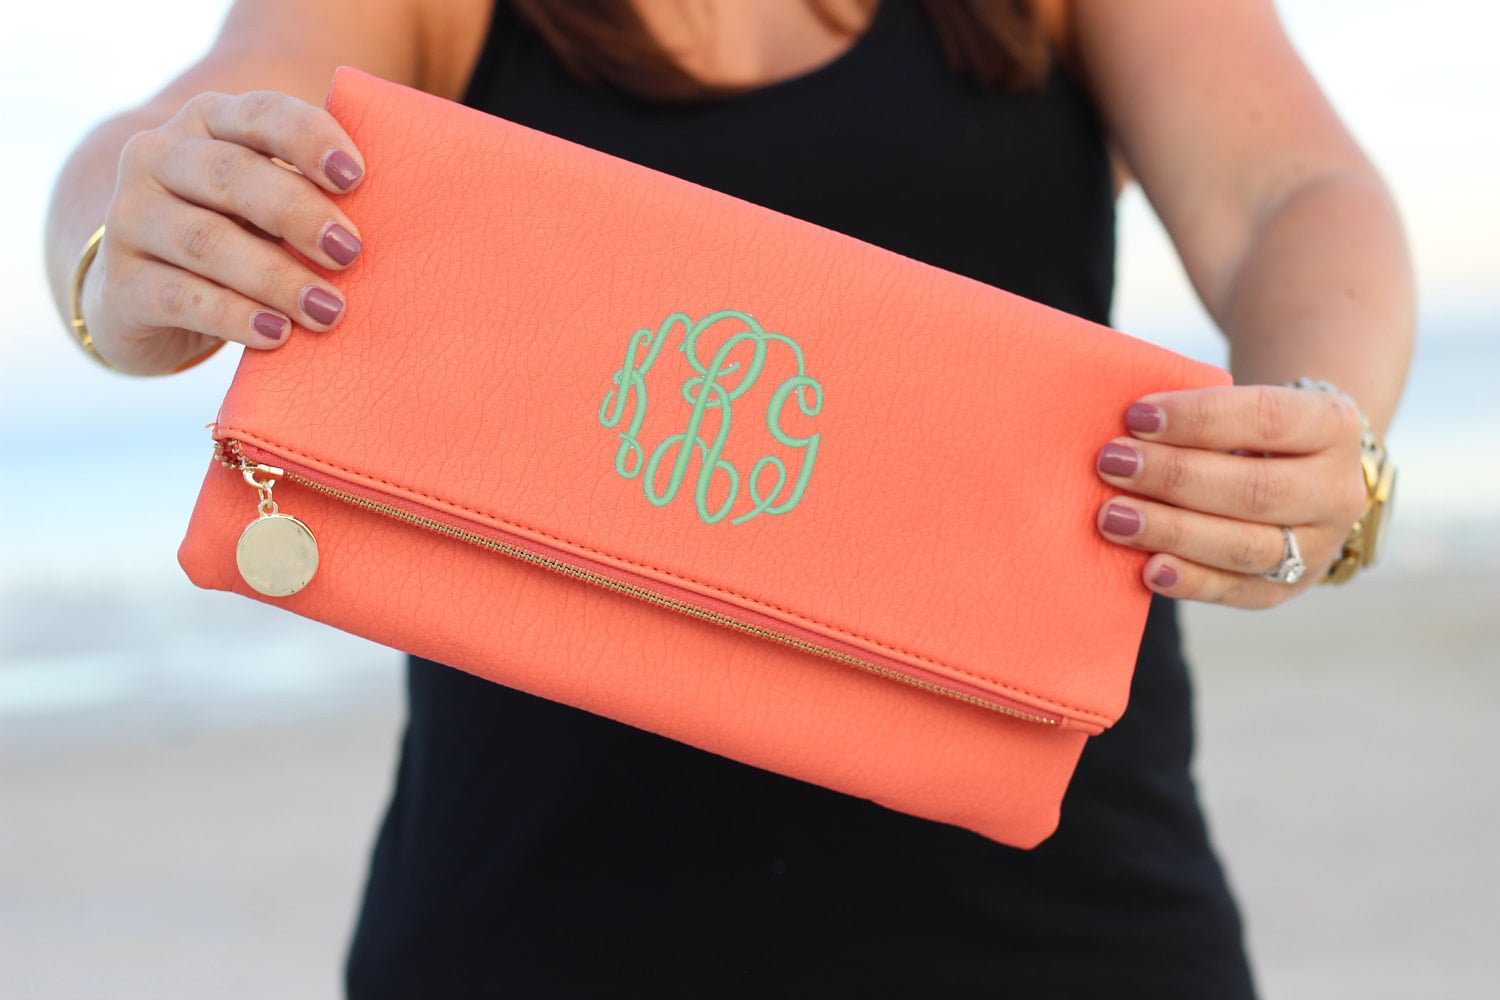 Monogrammed Clutch Purse | Envelope Clutch Purse | Bridesmaid Gift | Mother's Day Gift